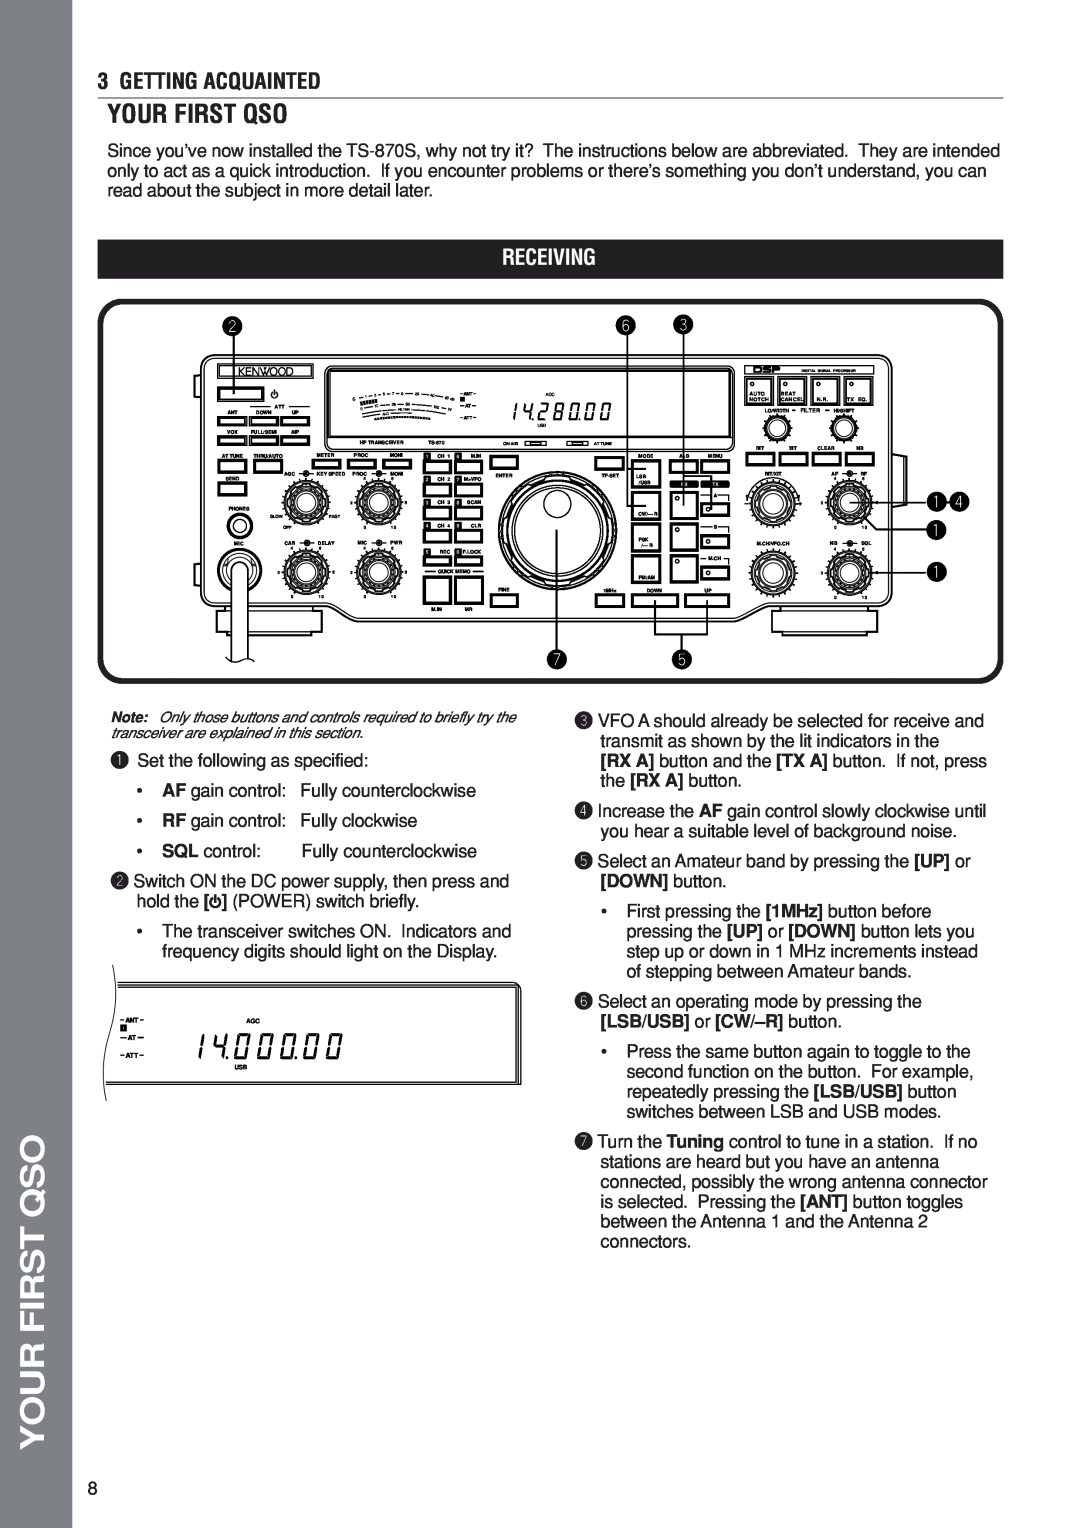 Kenwood TS-870S instruction manual Your First Qso, Getting Acquainted, Receiving, qr q q 